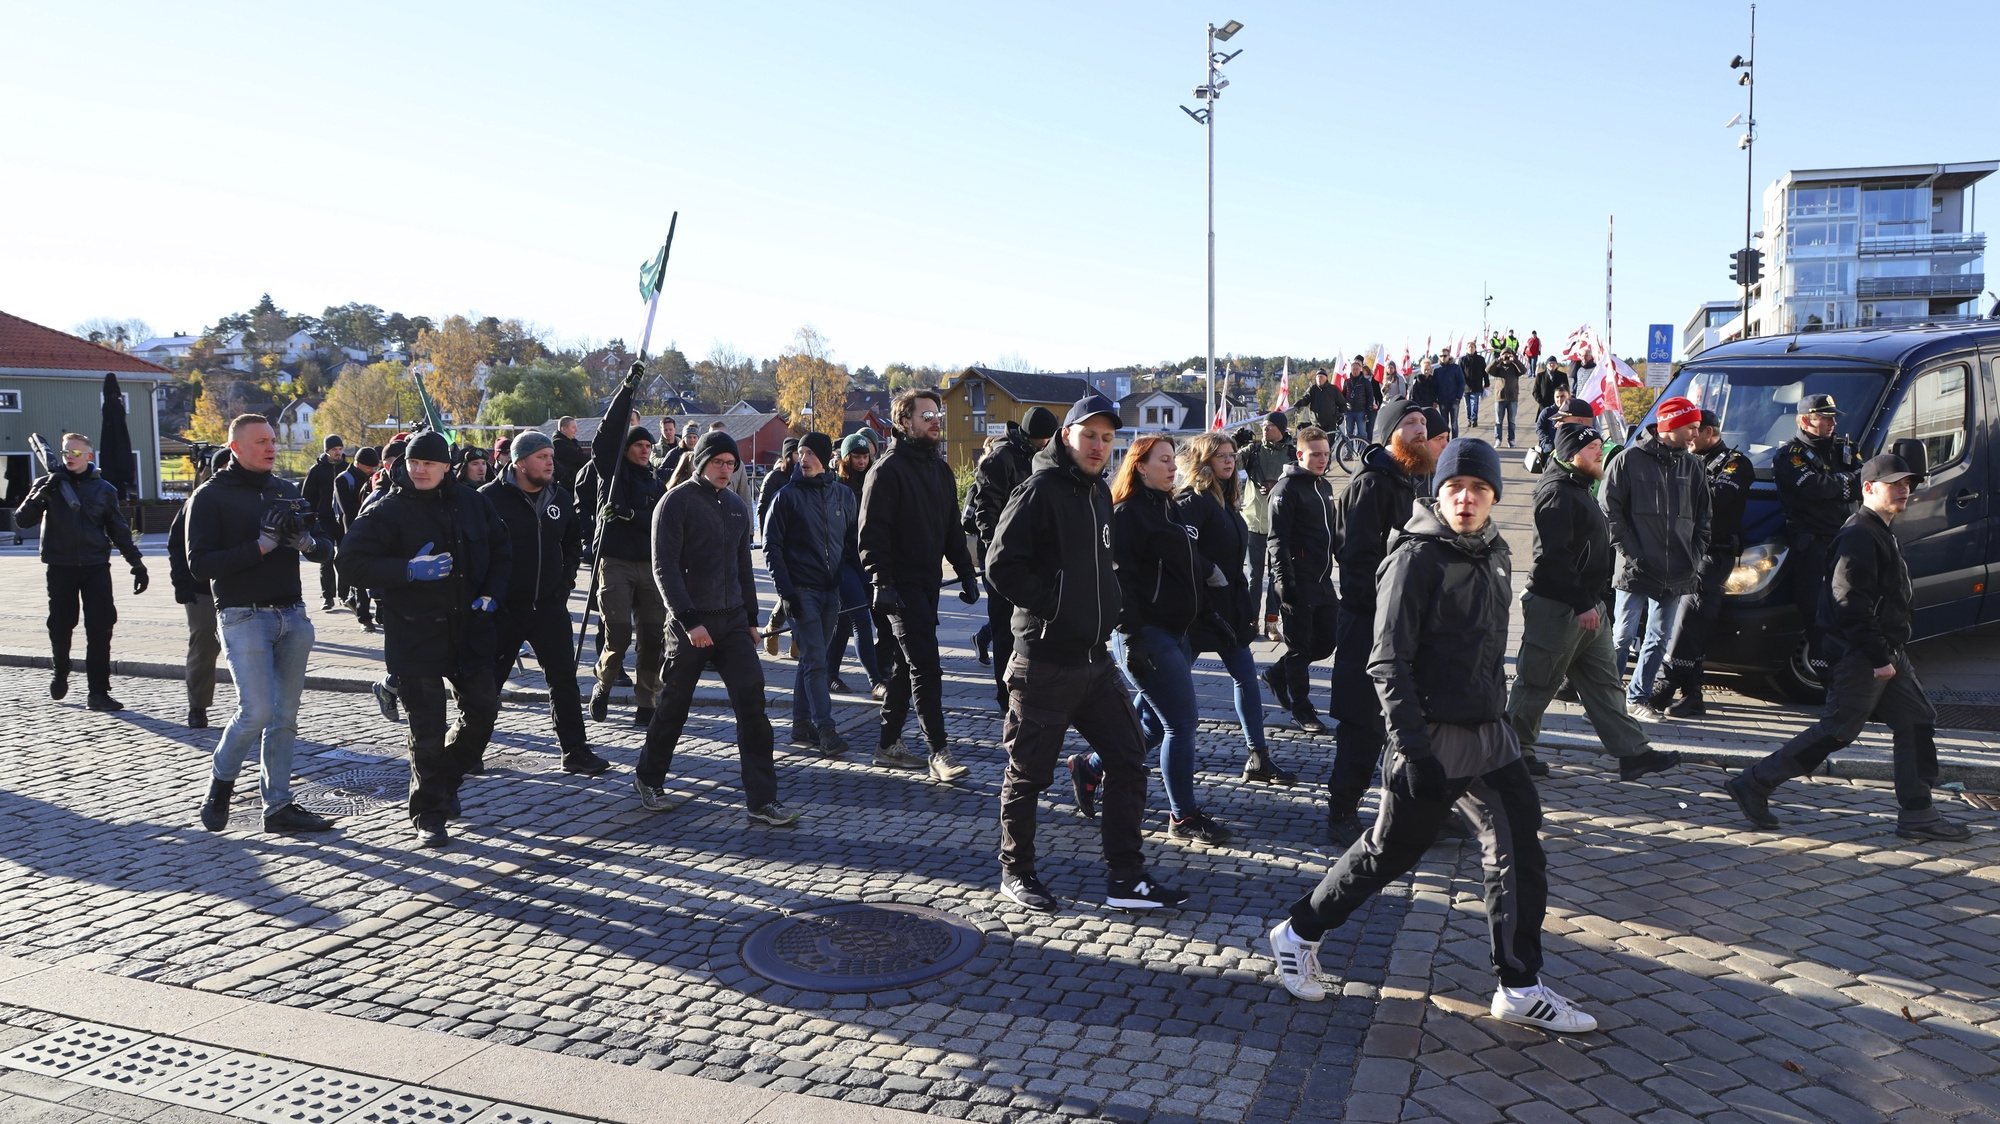 epa07123776 Members of neo-nazi organization Nordic Resistance Movement march during demonstration in Fredrikstad, Norway, 27 October 2018.  EPA/Oern Borgen  NORWAY OUT